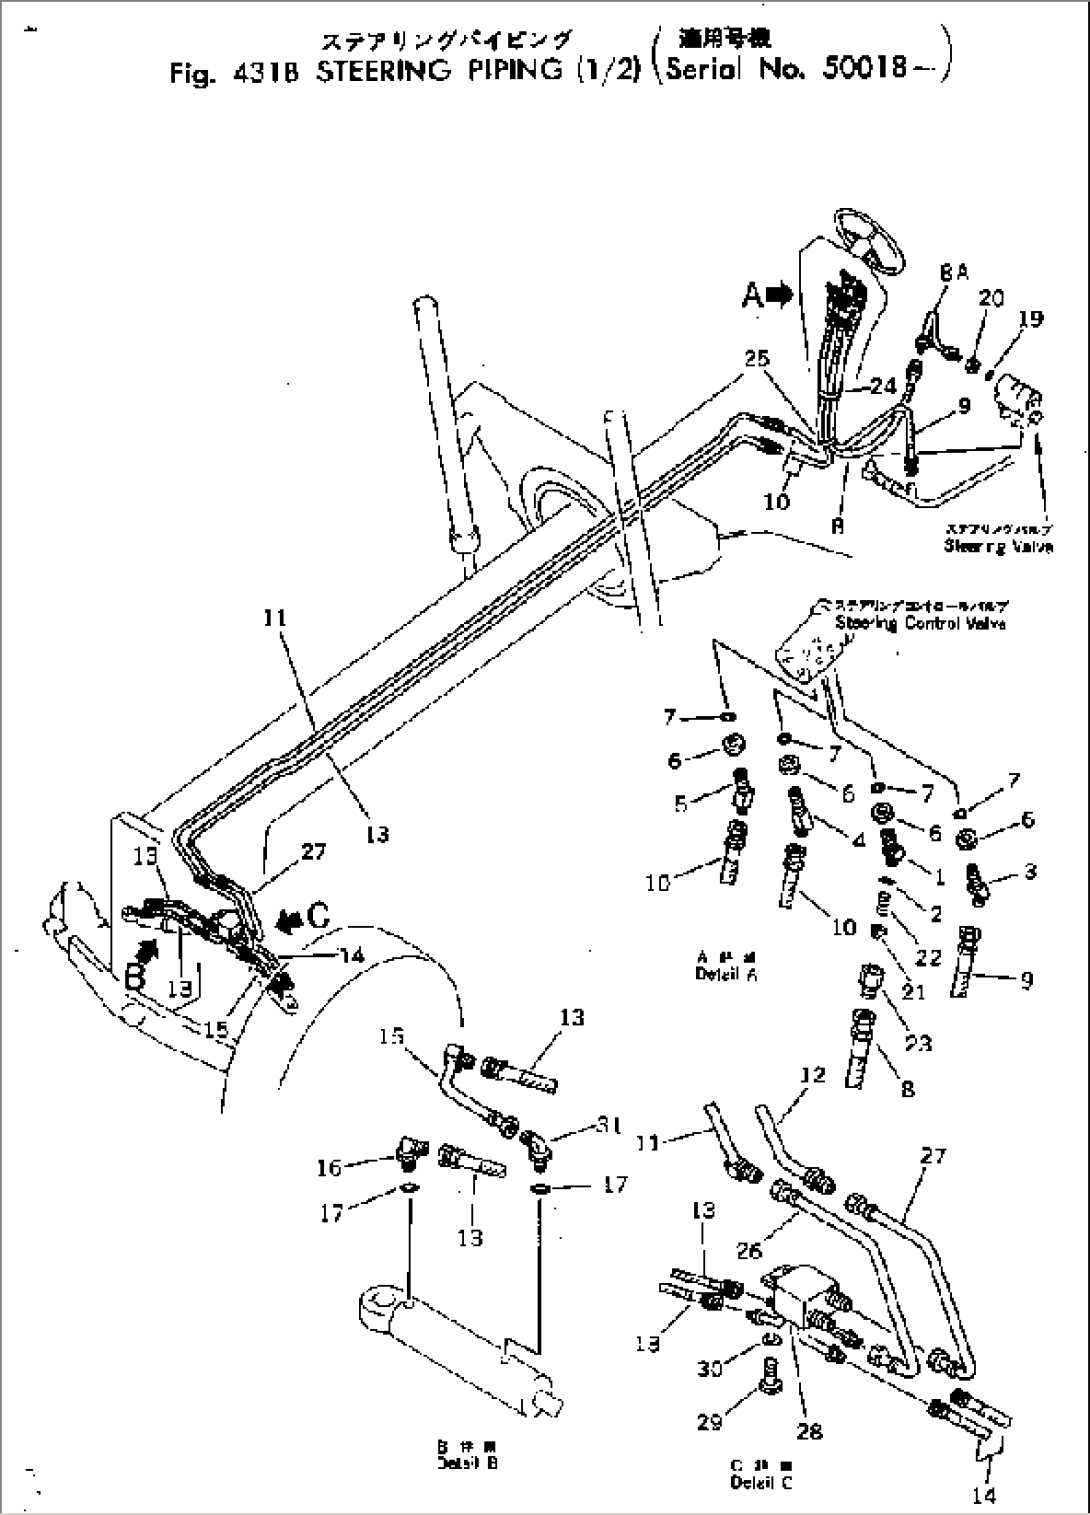 STEERING PIPING (1/2)(#50018-)